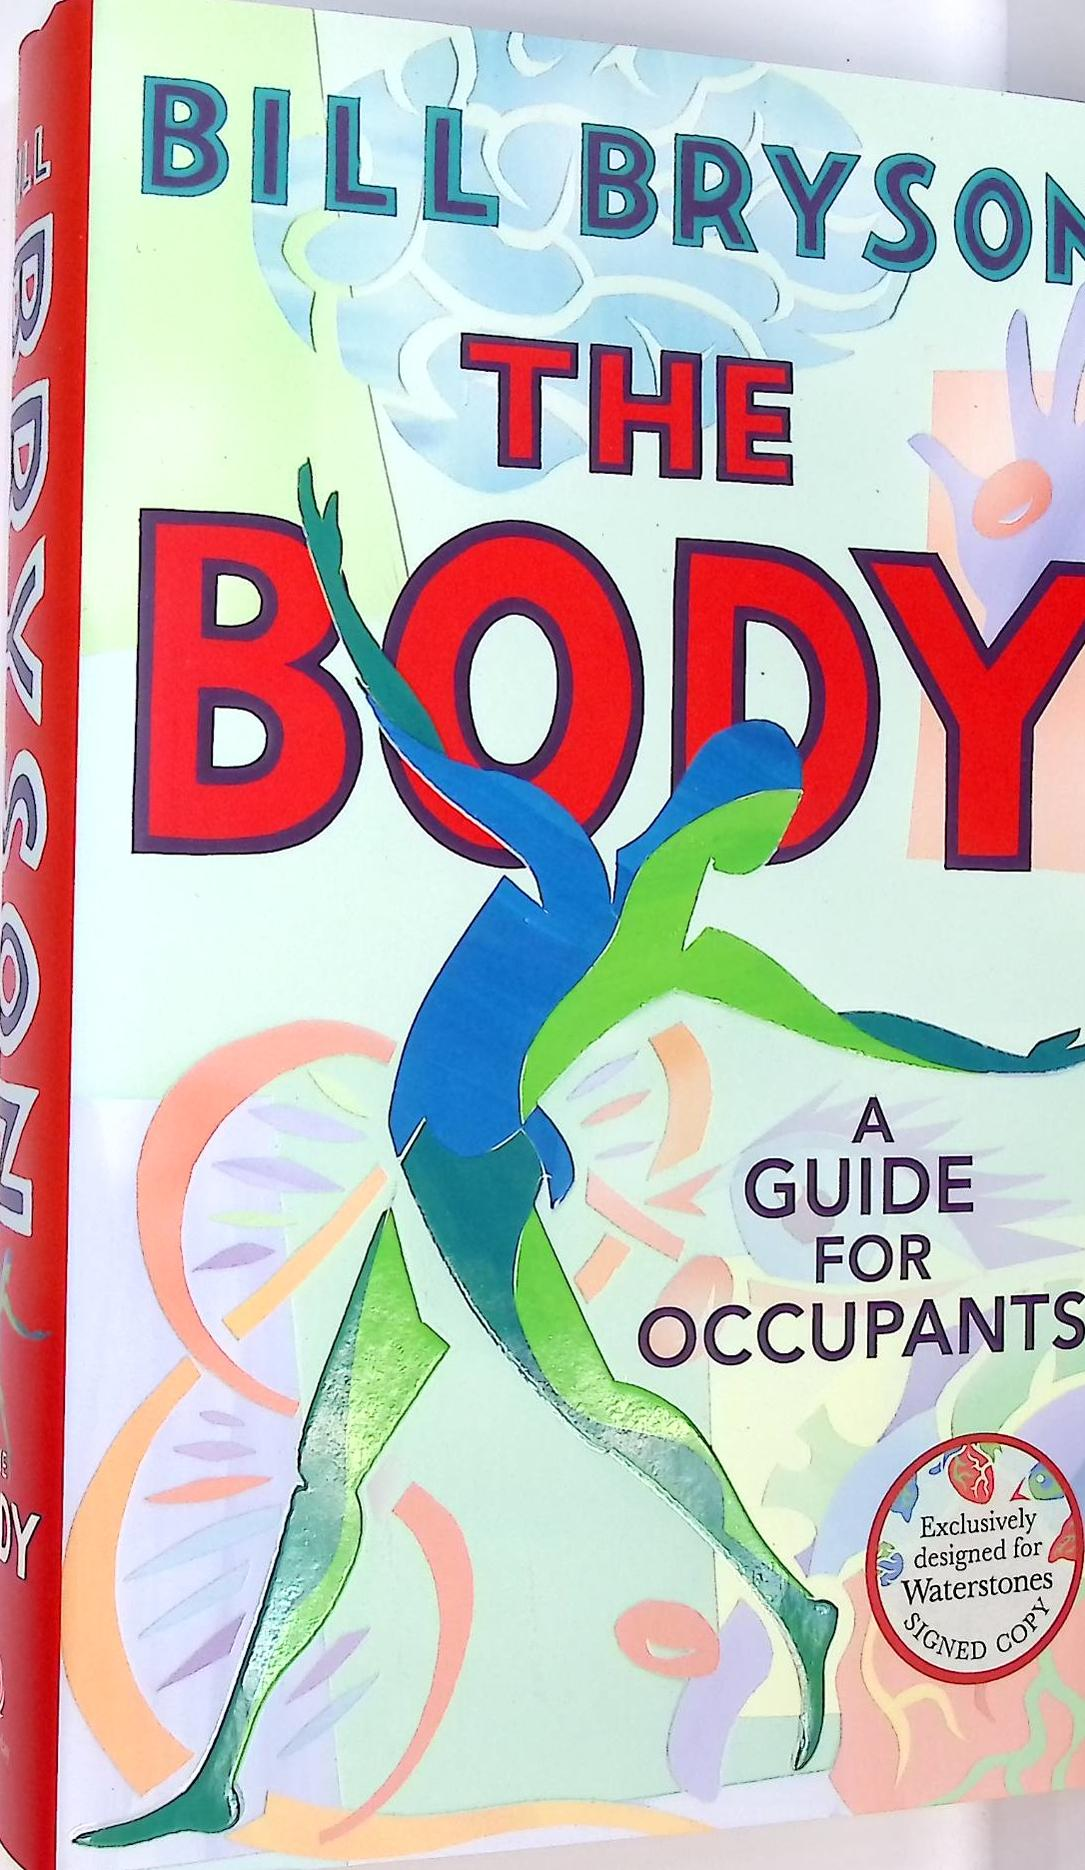 The Body: A Guide for Occupants.